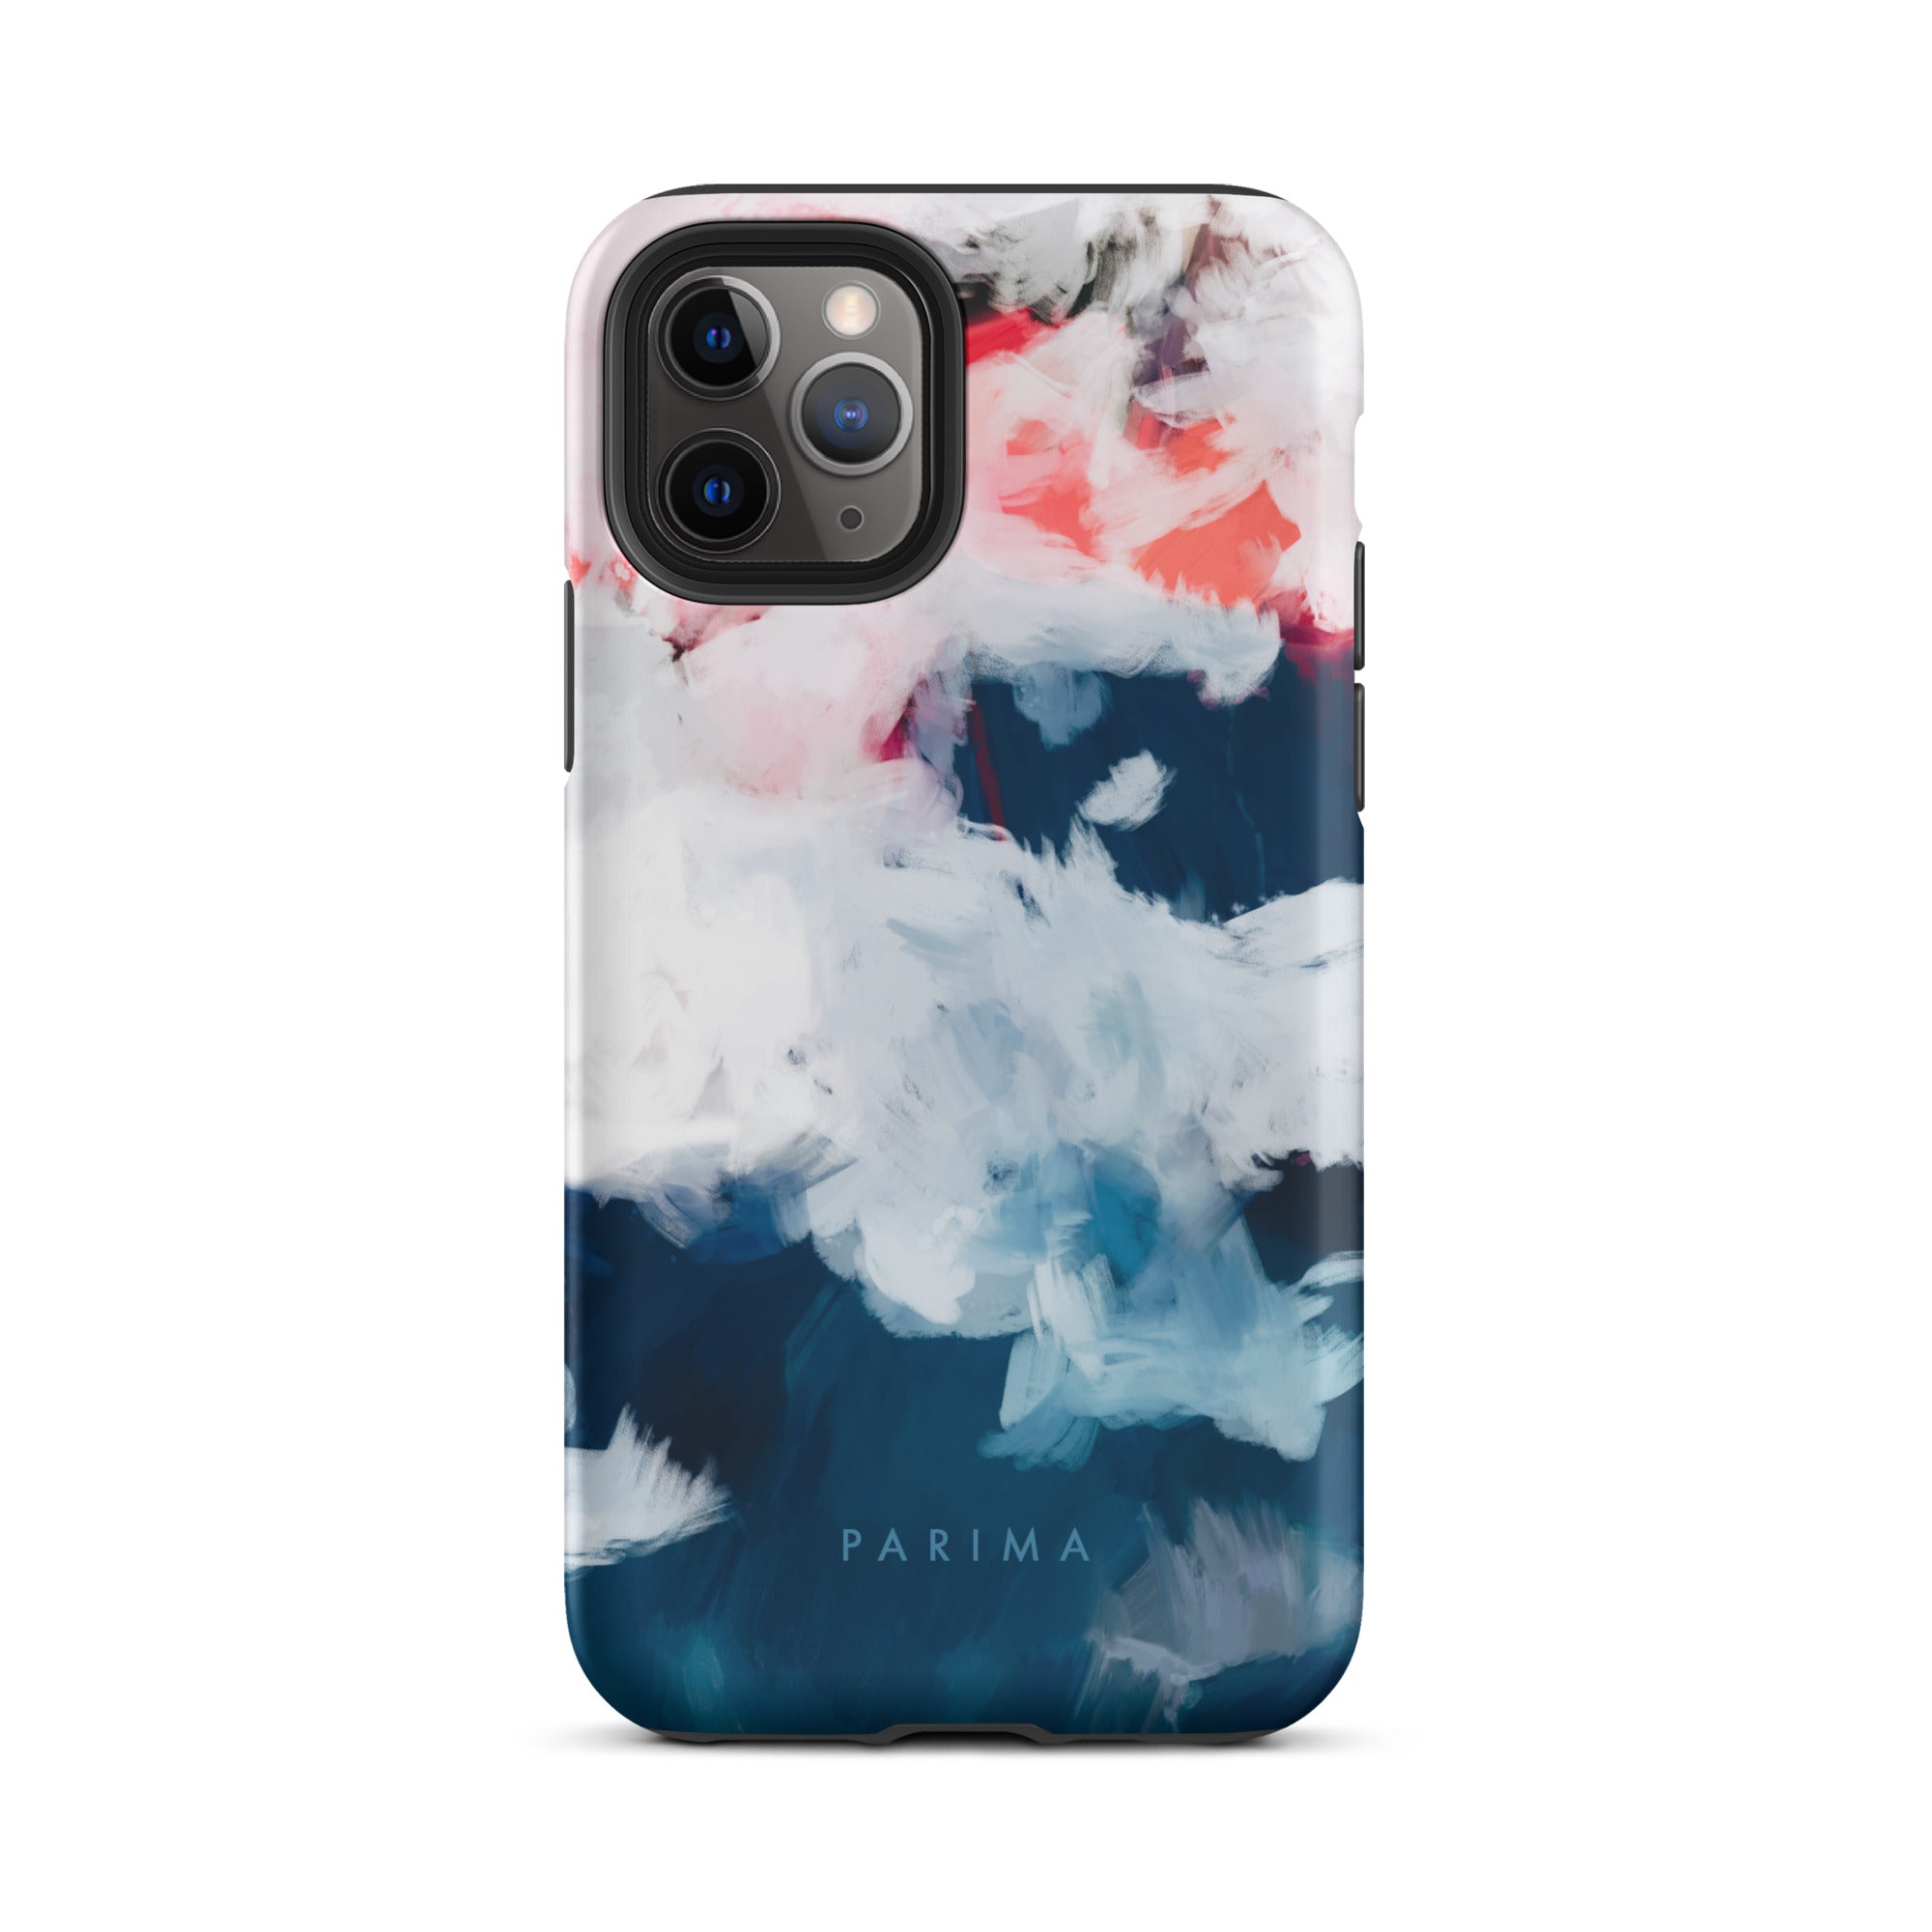 Oceane, blue and pink abstract art on iPhone 11 Pro tough case by Parima Studio